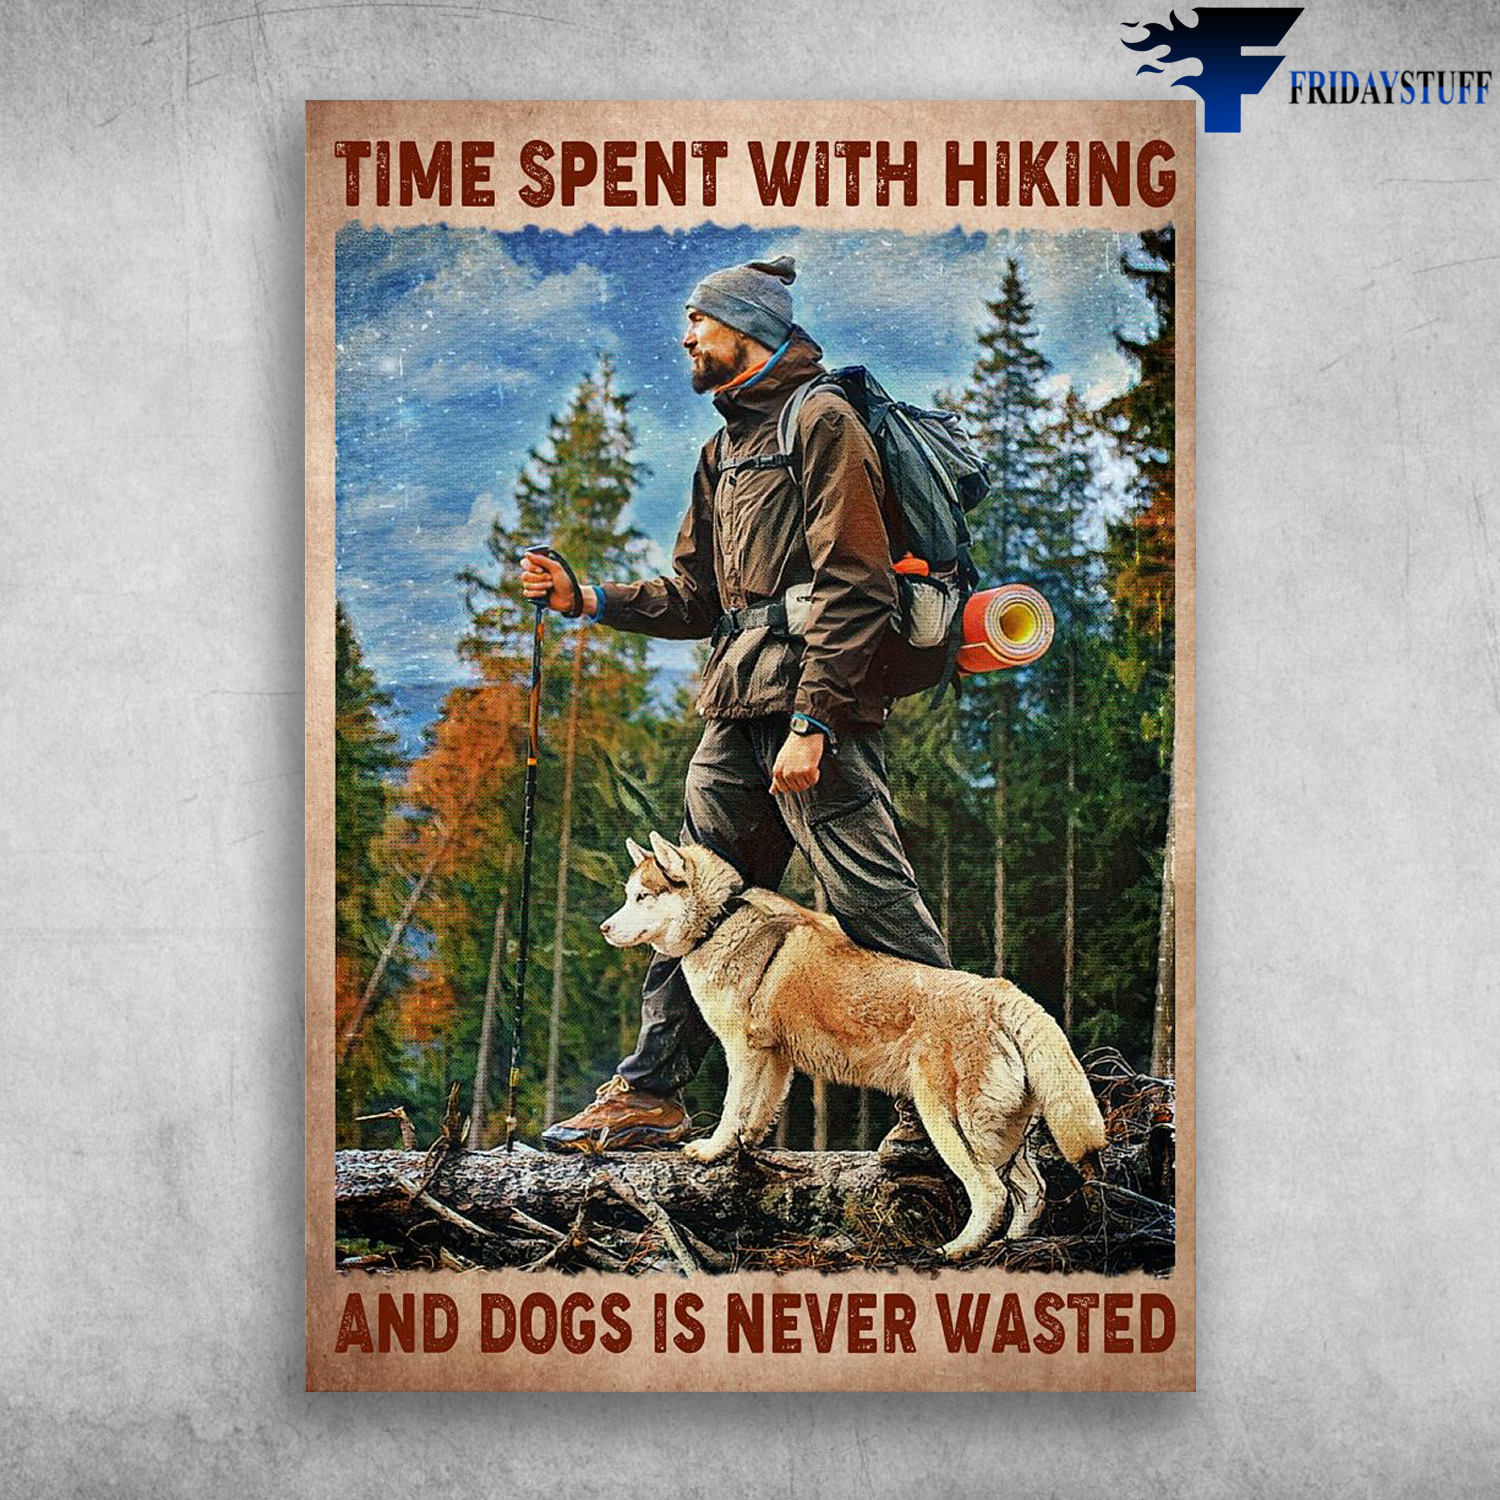 Man Hiking With Dog - Time Spent With Hiking, And Dogs Is Never Wasted